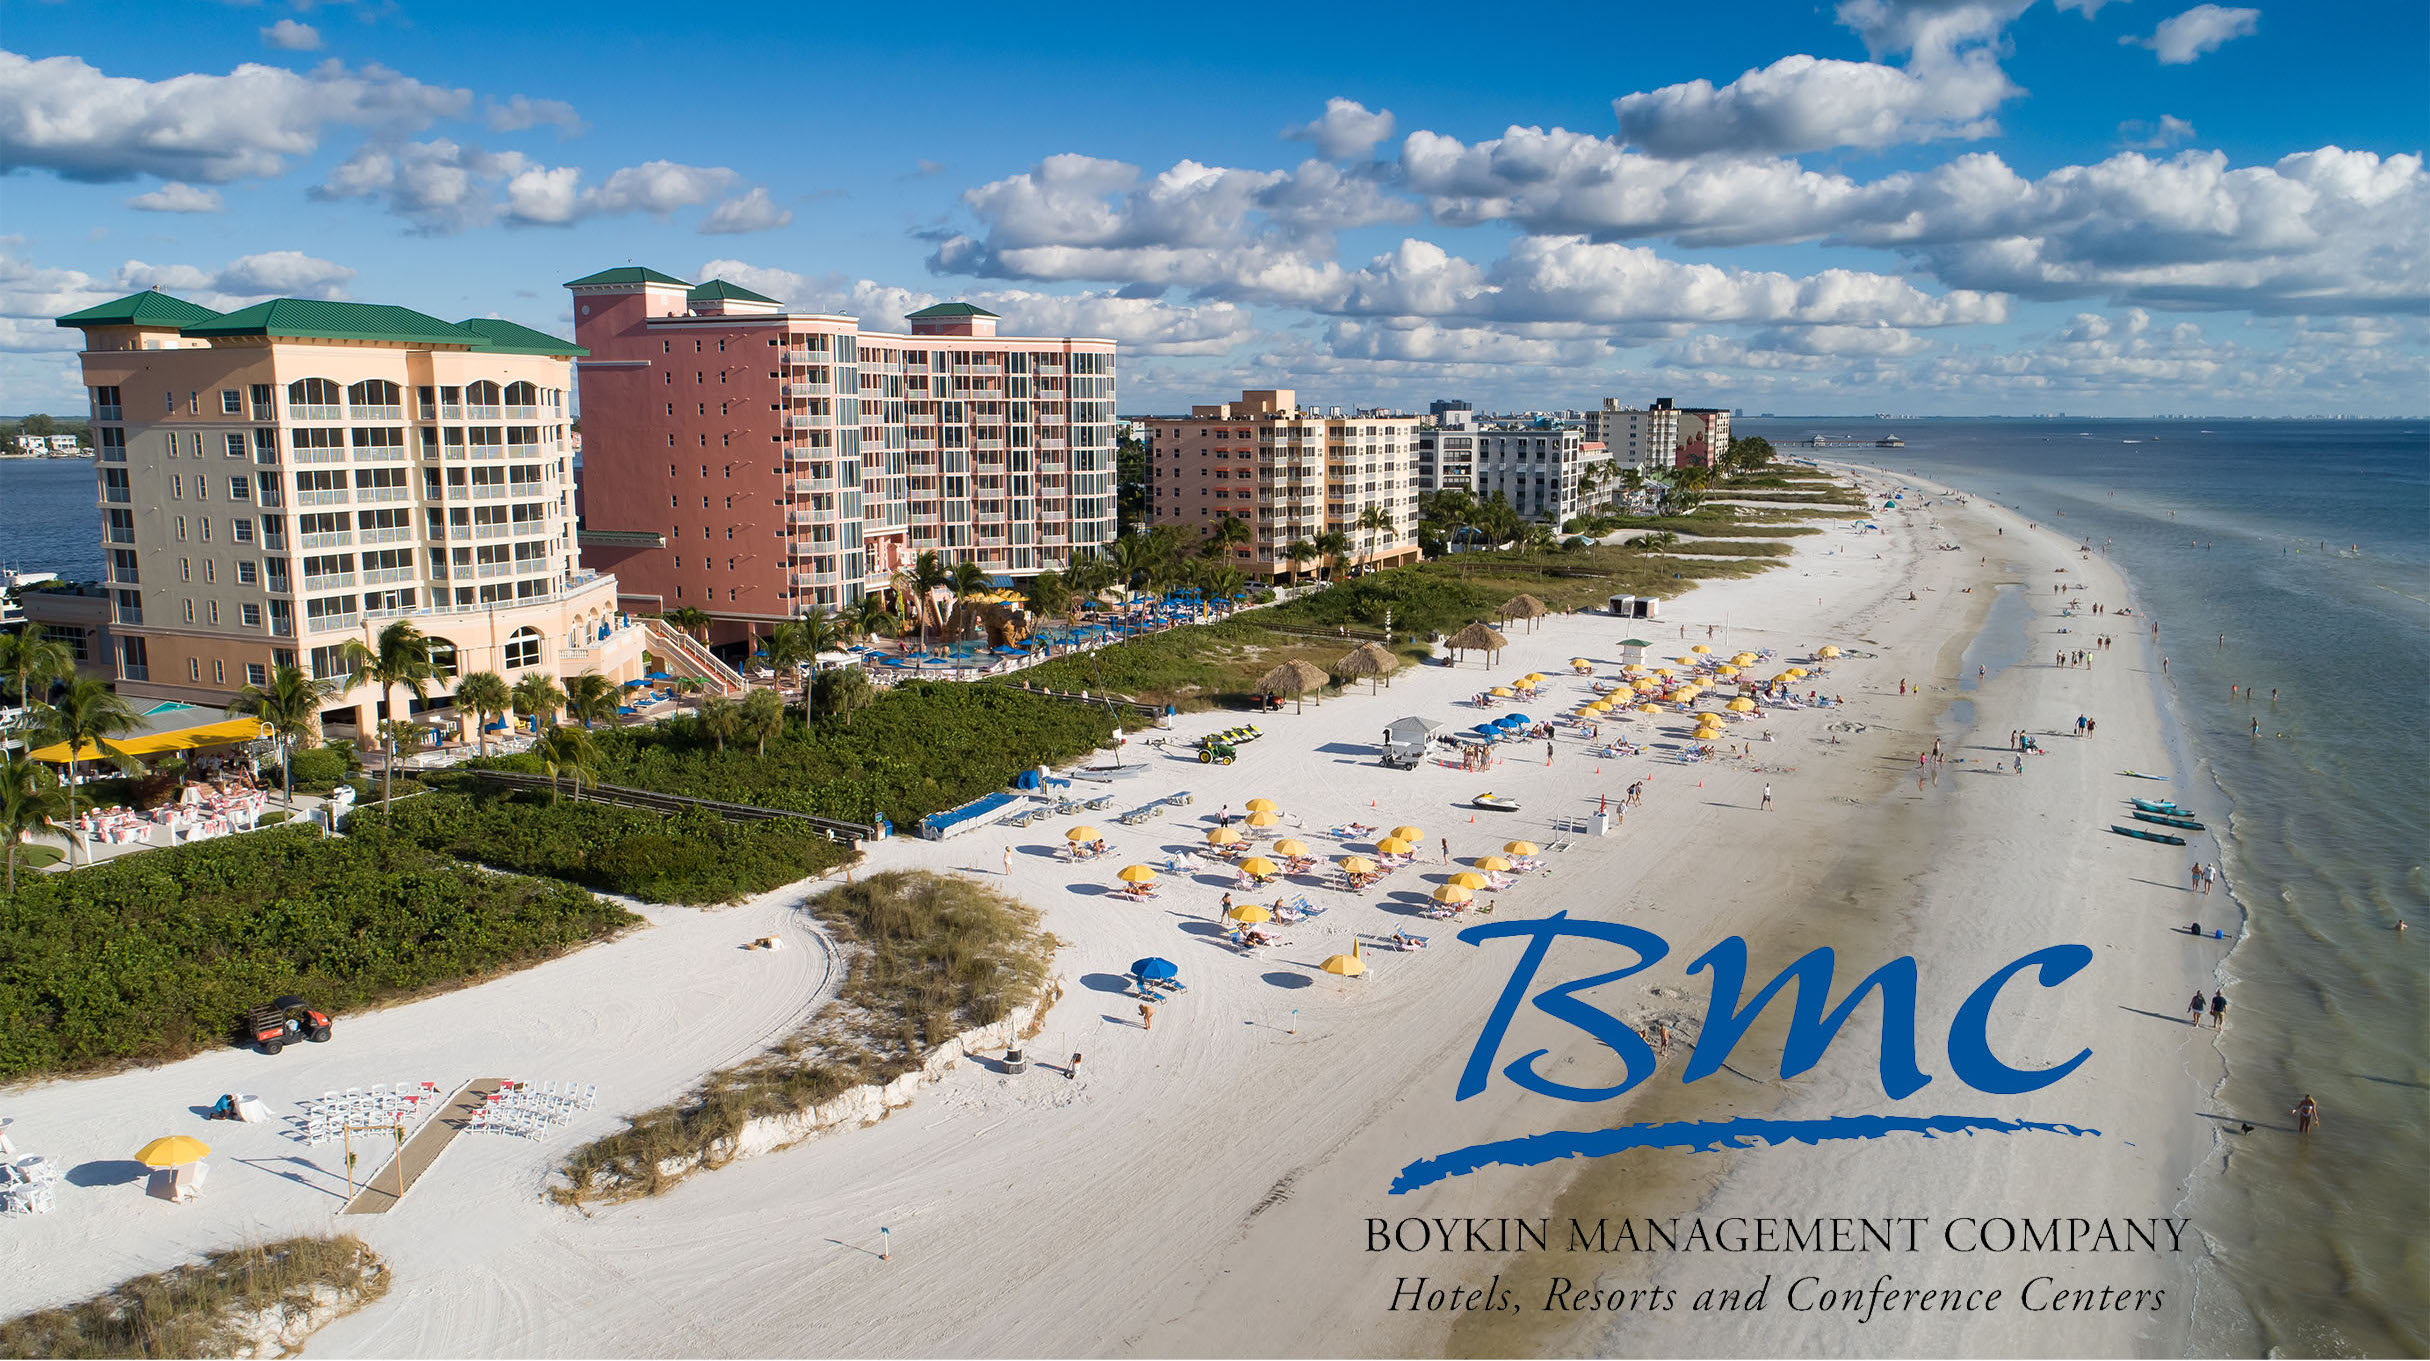 nov2 - Boykin Management Chooses Maestro PMS to Power Its Coastal Condo Resort Hotels - Innovative Property Management Software Solutions Powering Hotels, Resorts & Multi‑Property Groups.